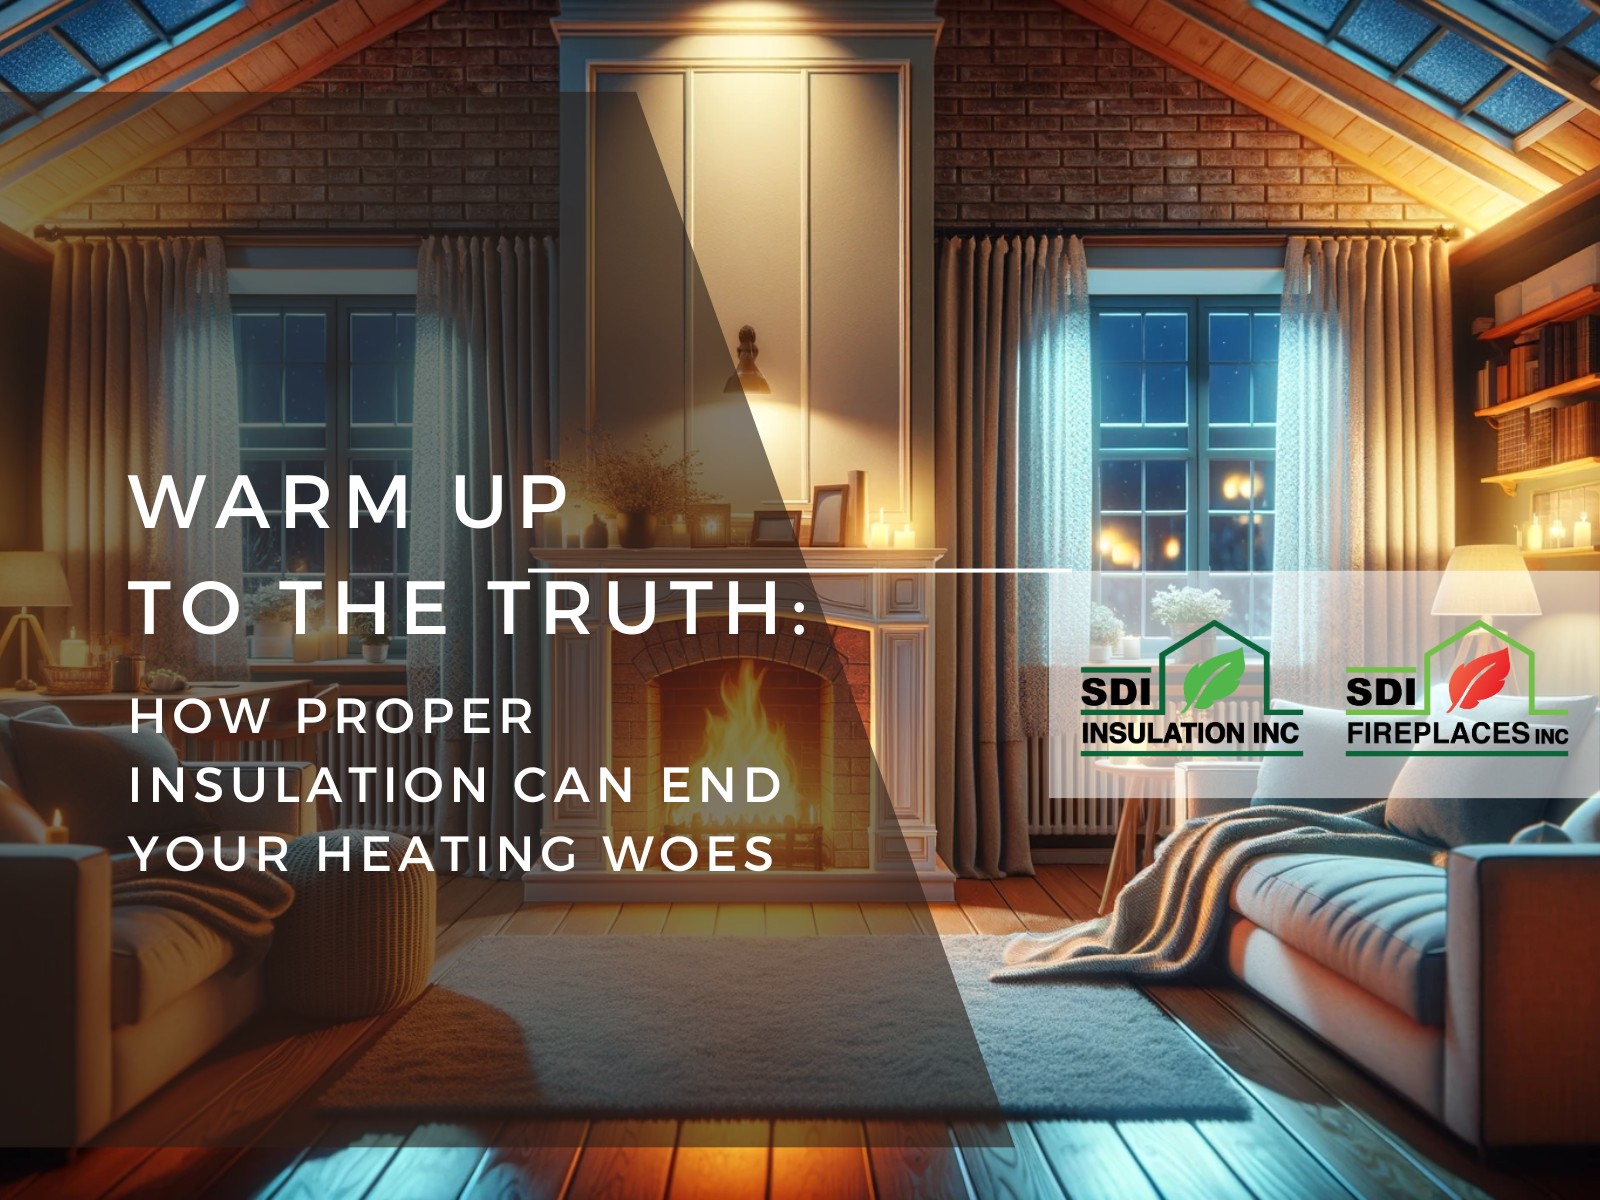 Warm Up to the Truth: How Proper Insulation Can End Your Heating Woes